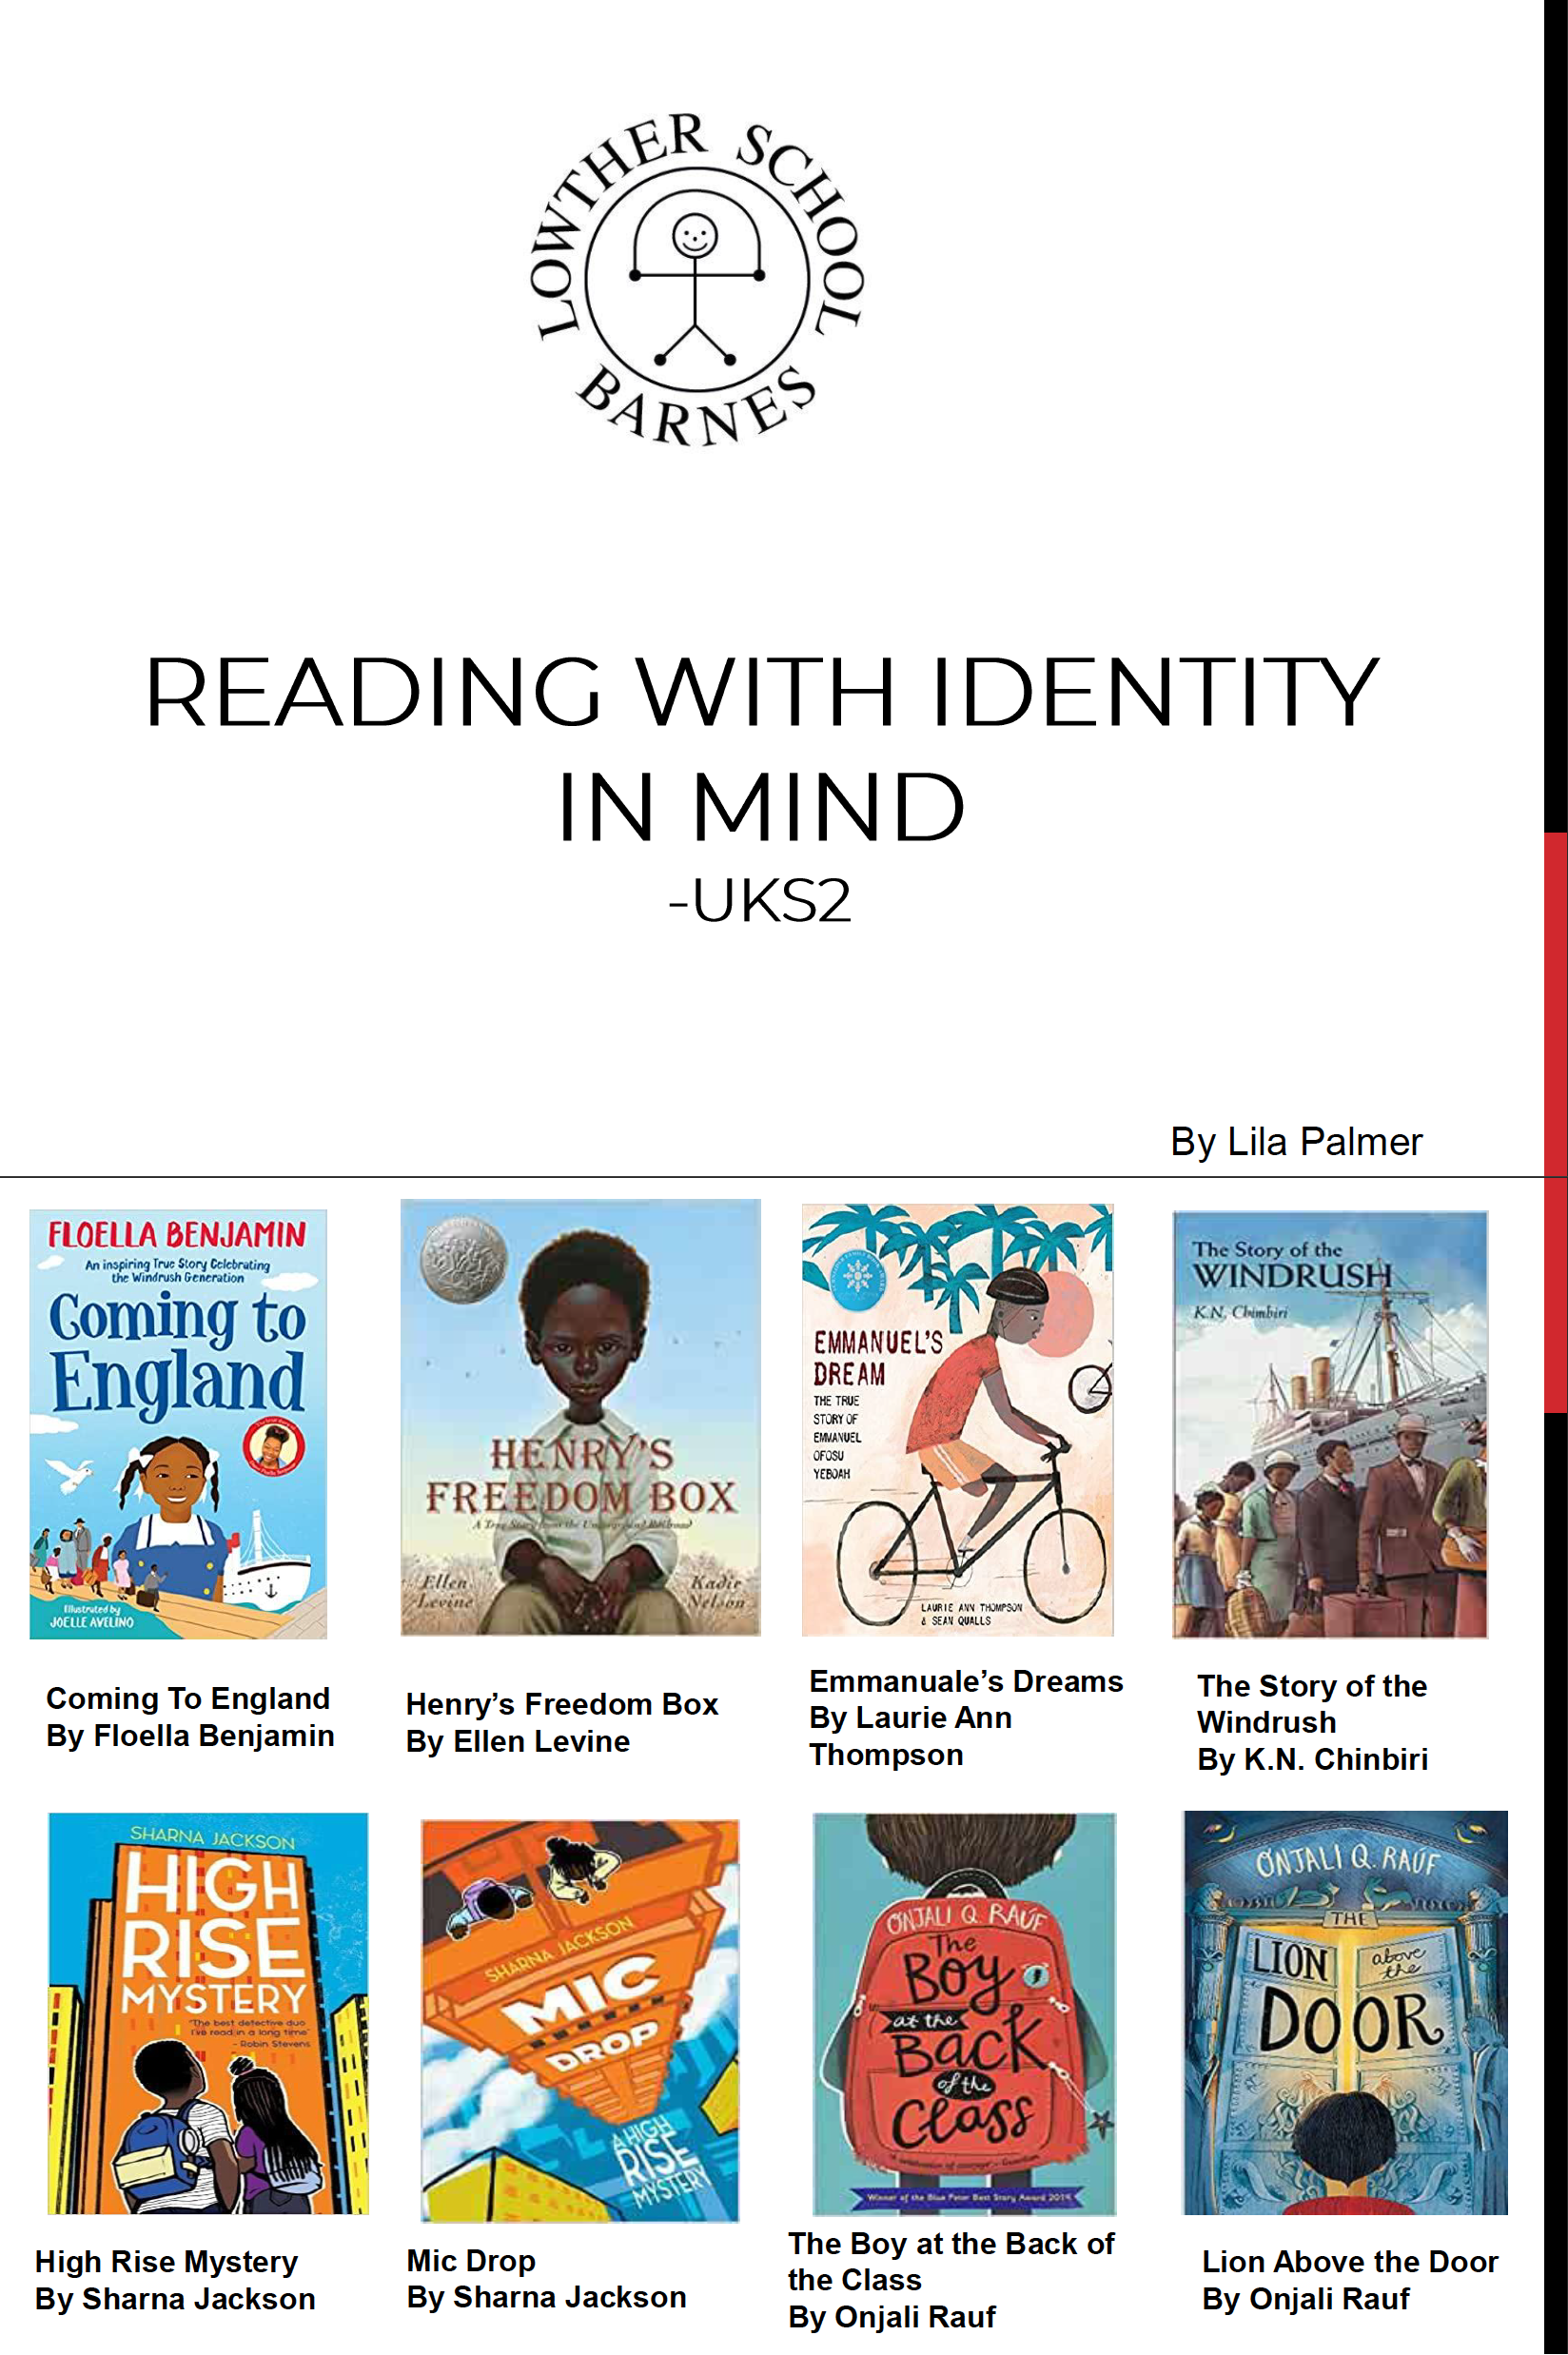 UKS2 Readingwith identity in mind PDF link